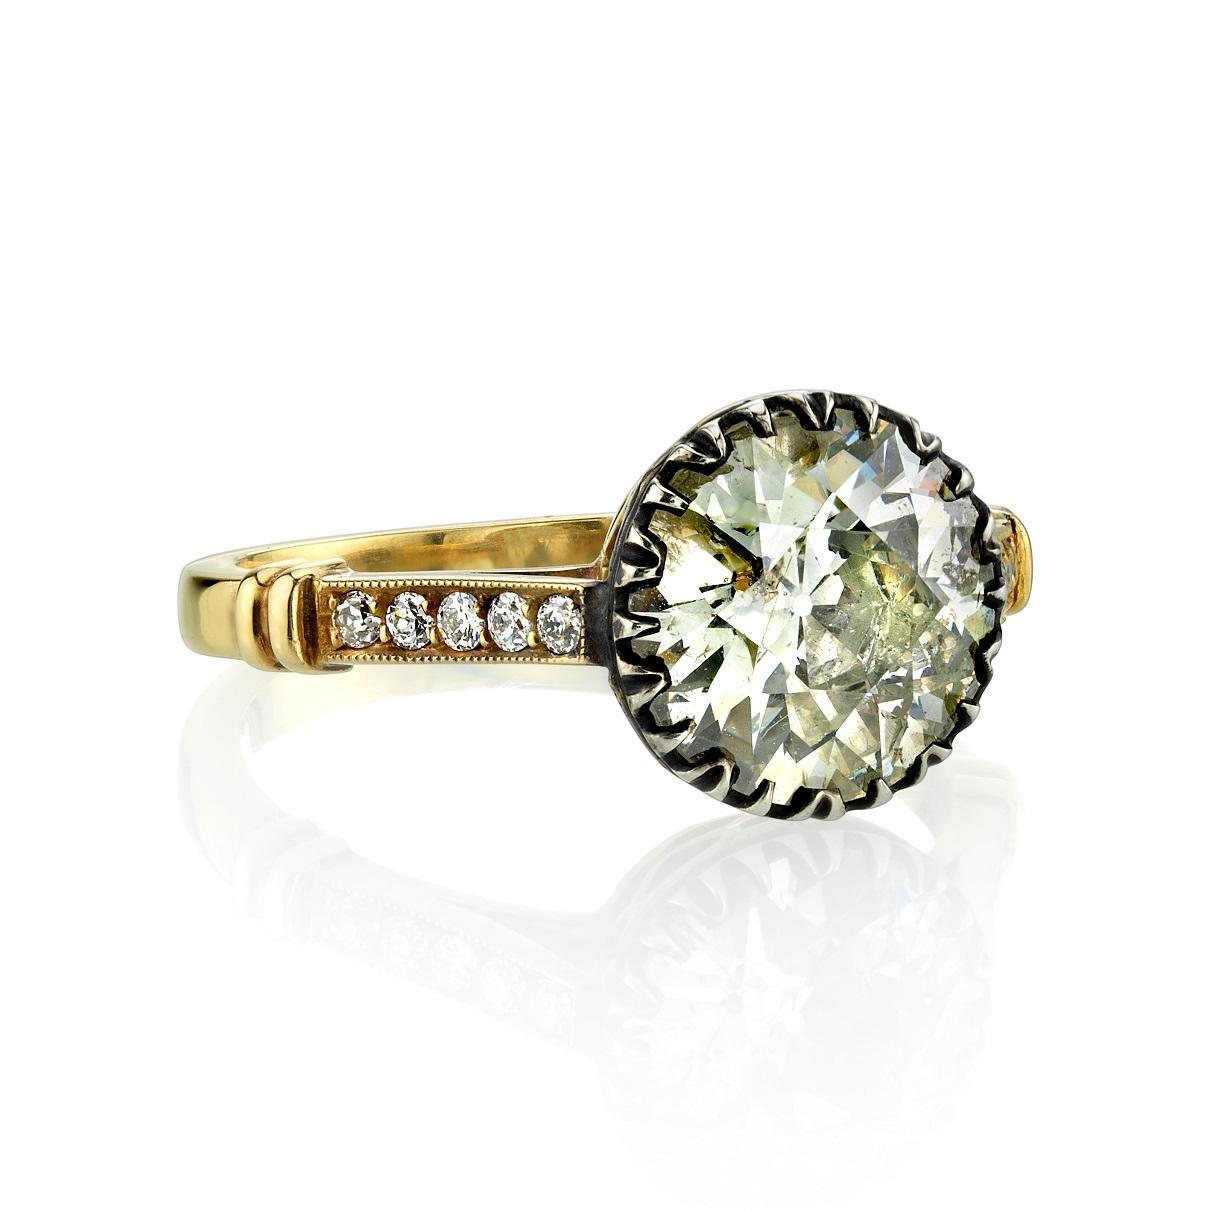 2.66ct J/I1 EGL certified old European cut diamond set in a handcrafted 18K yellow gold and silver mounting. This beautiful ring is Georgian inspired and offers a modern twist. The ring is currently a size 6 and can be sized to fit. 